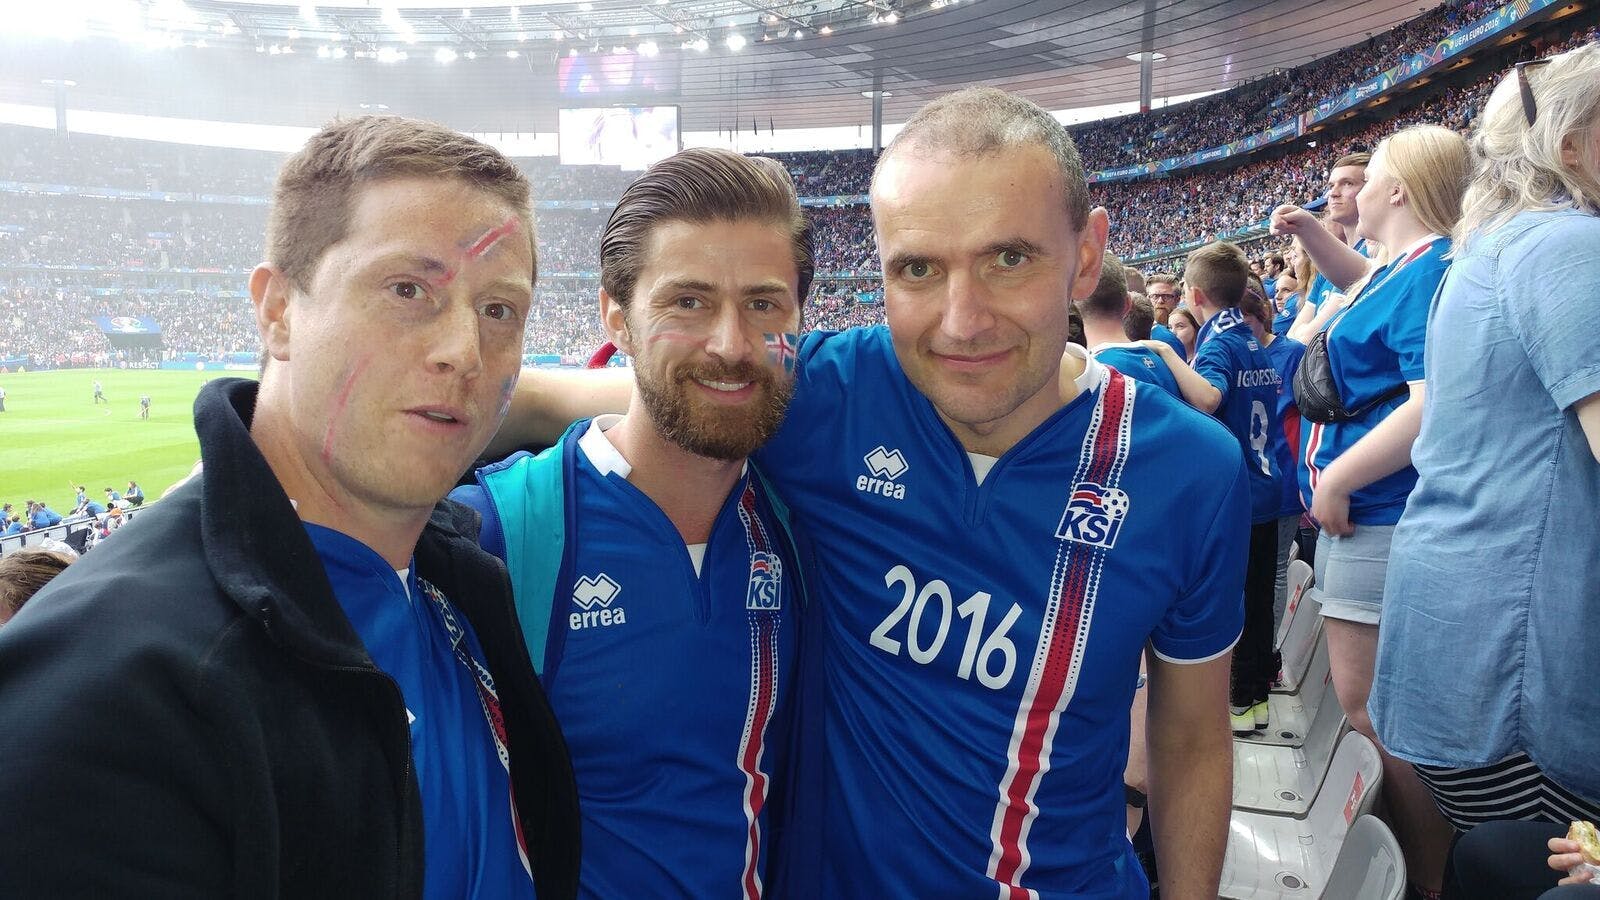 Two fans of the Icelandic national football team and the president of Iceland, Guðni Th. Jóhannsson.